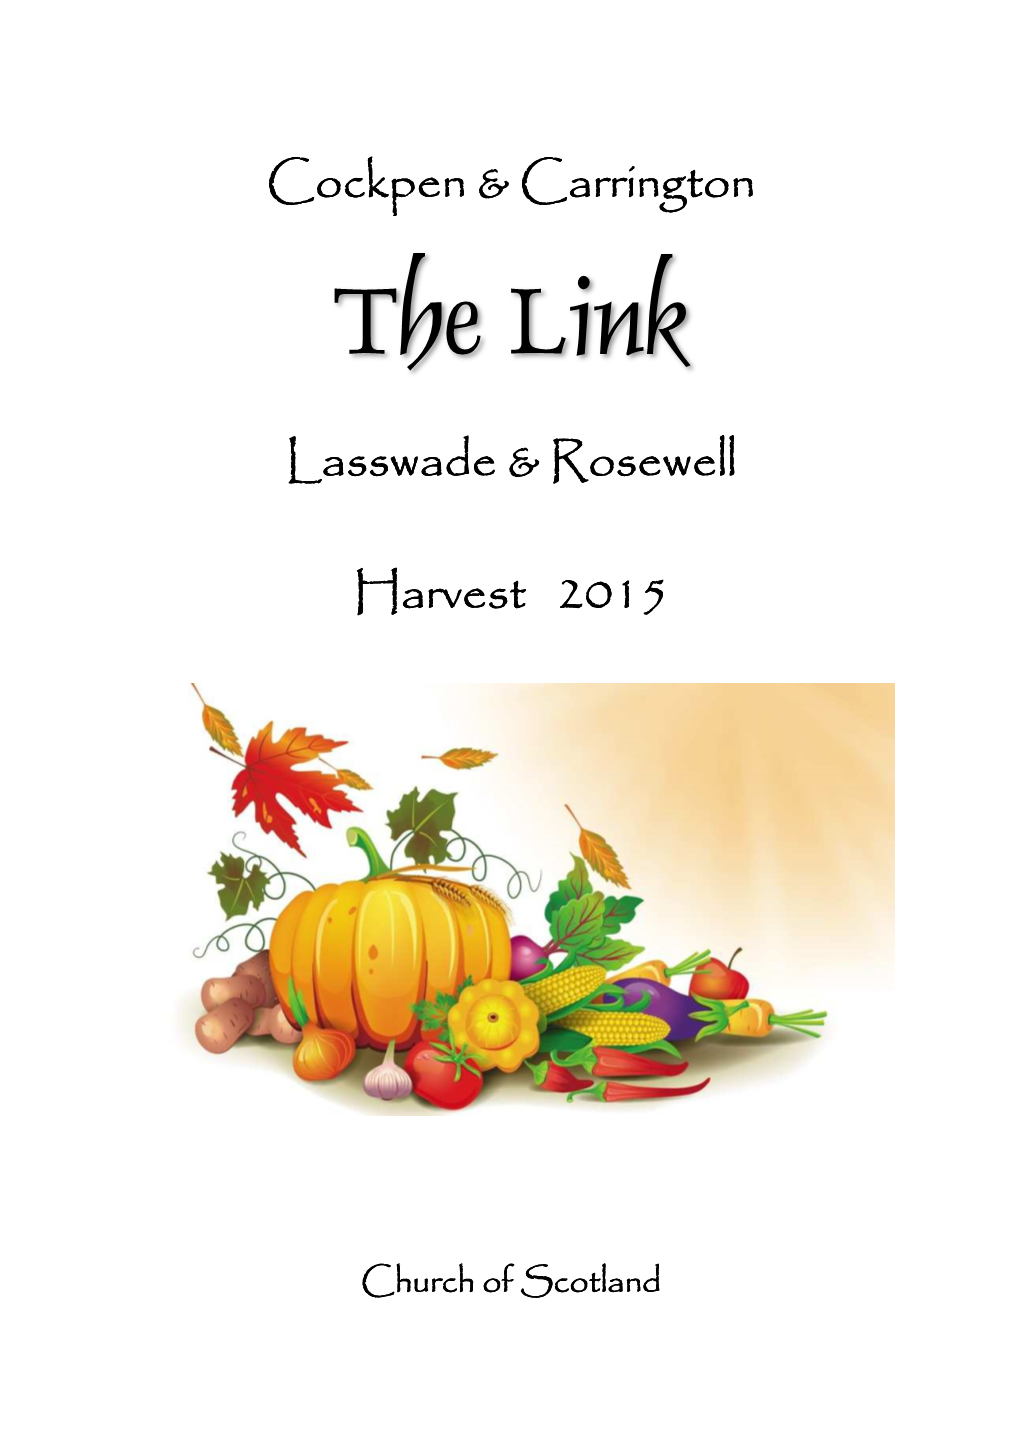 The Link Magazine Harvest 2015 Cockpen and Carrington With